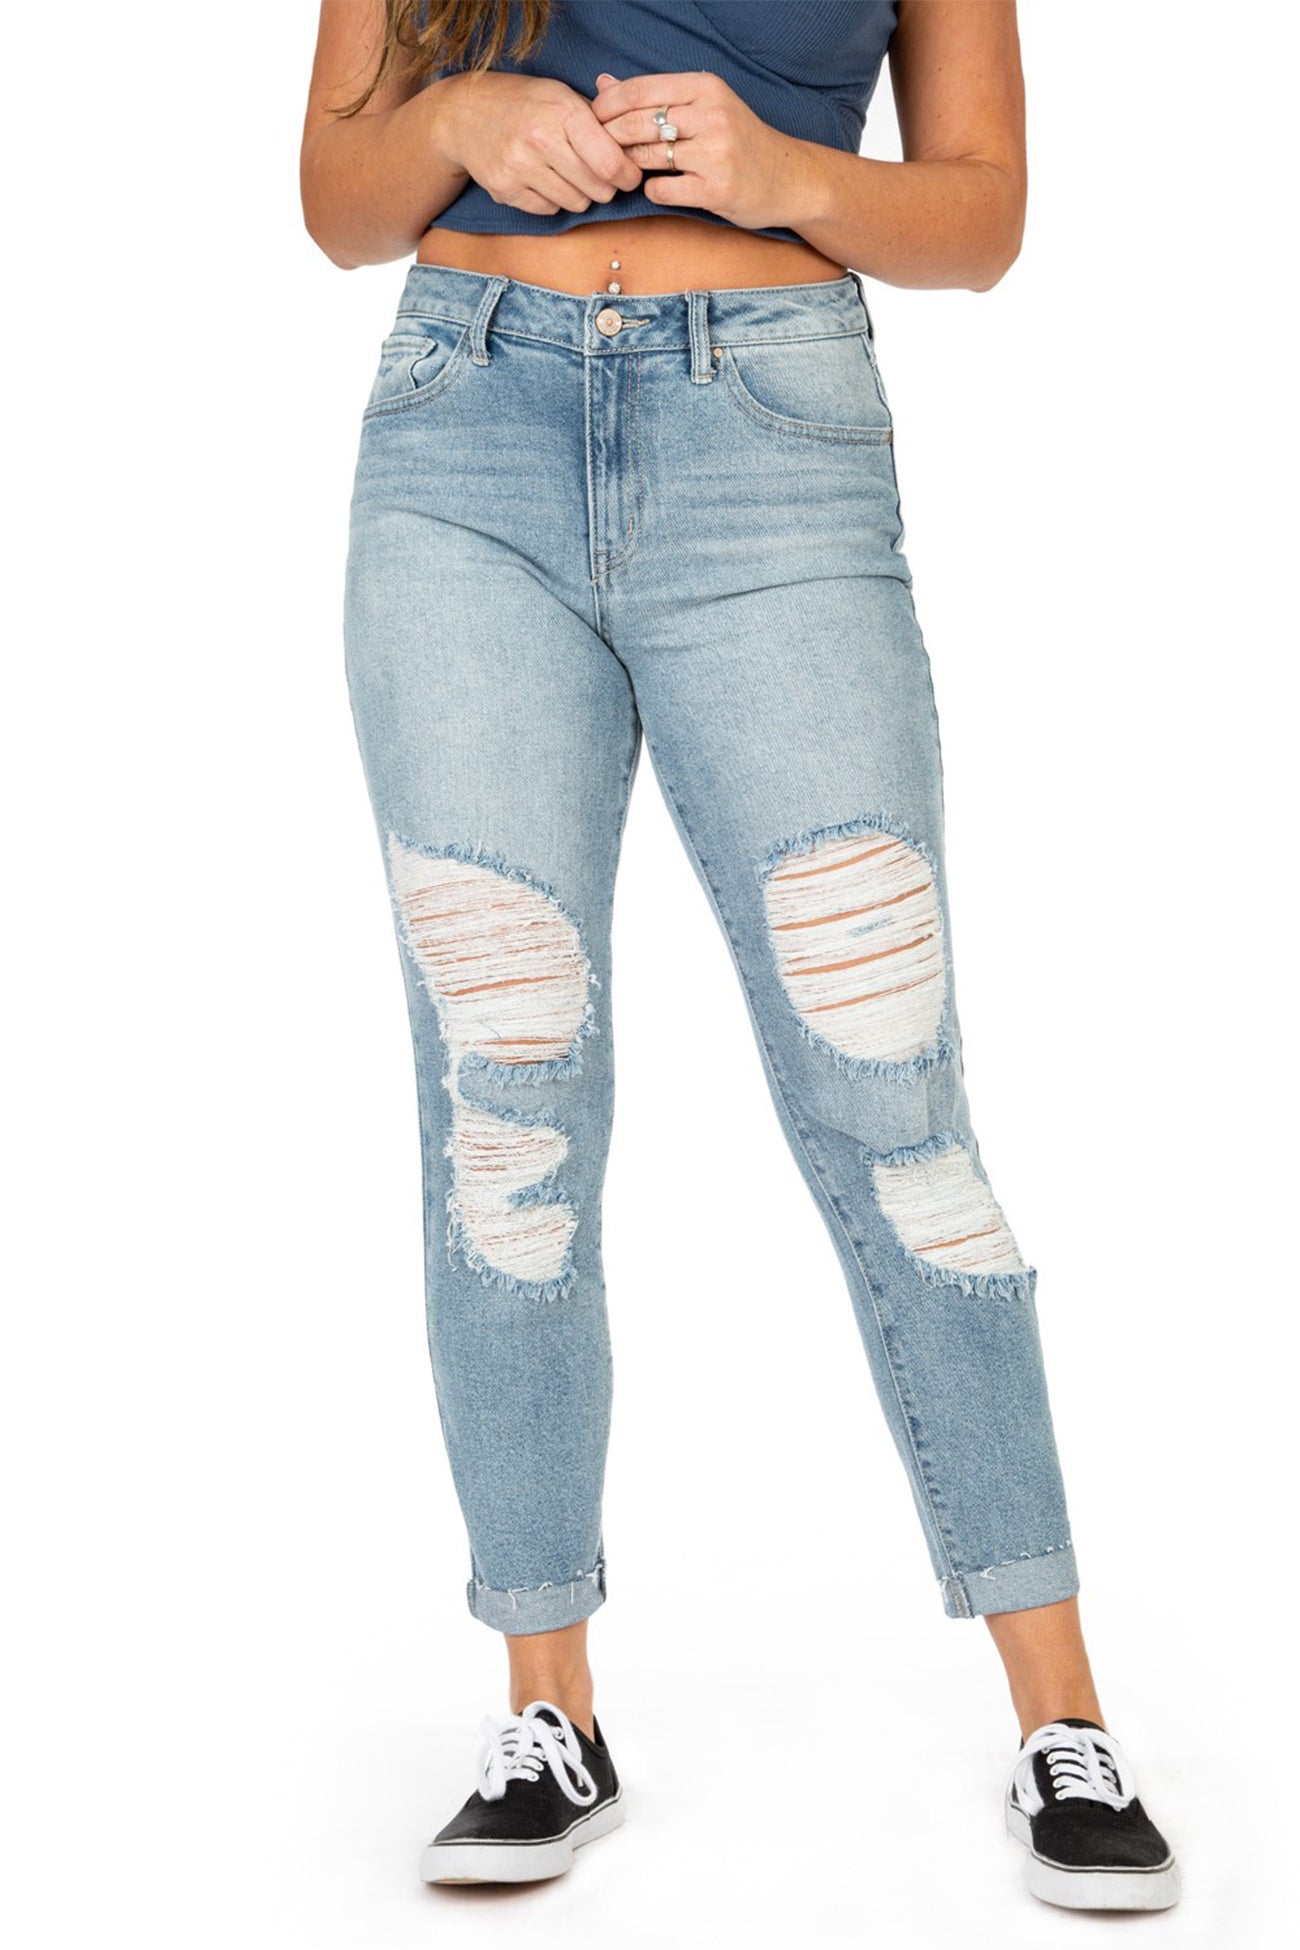 Women's High-Rise Ripped Medium Wash Vintage Flare Jeans